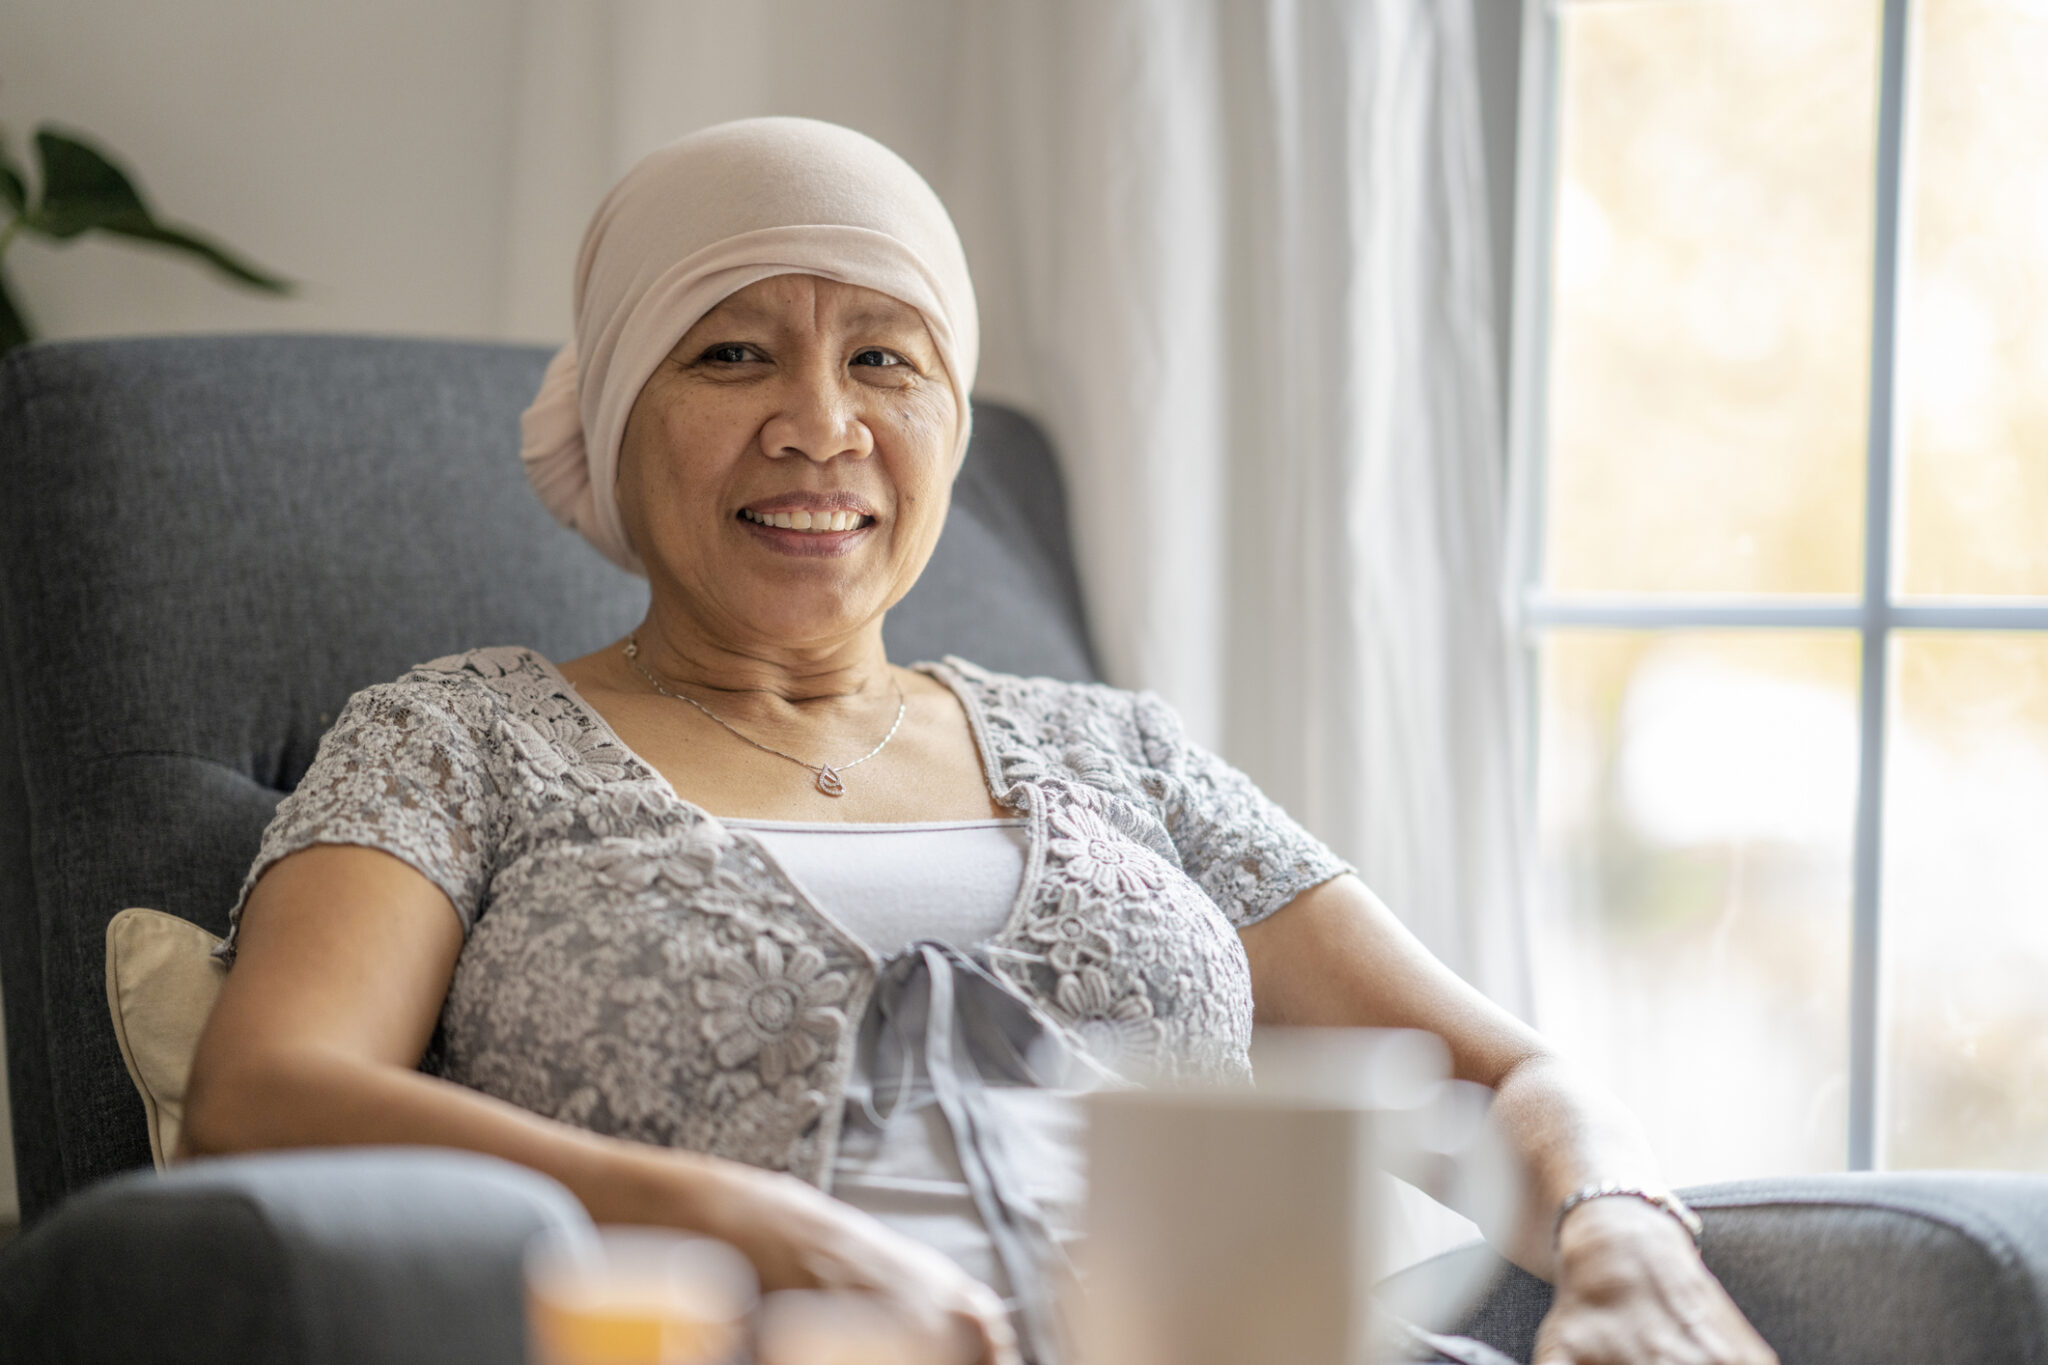 Elderly Filipino woman diagnosed with cancer sitting in her home with a headscarf.